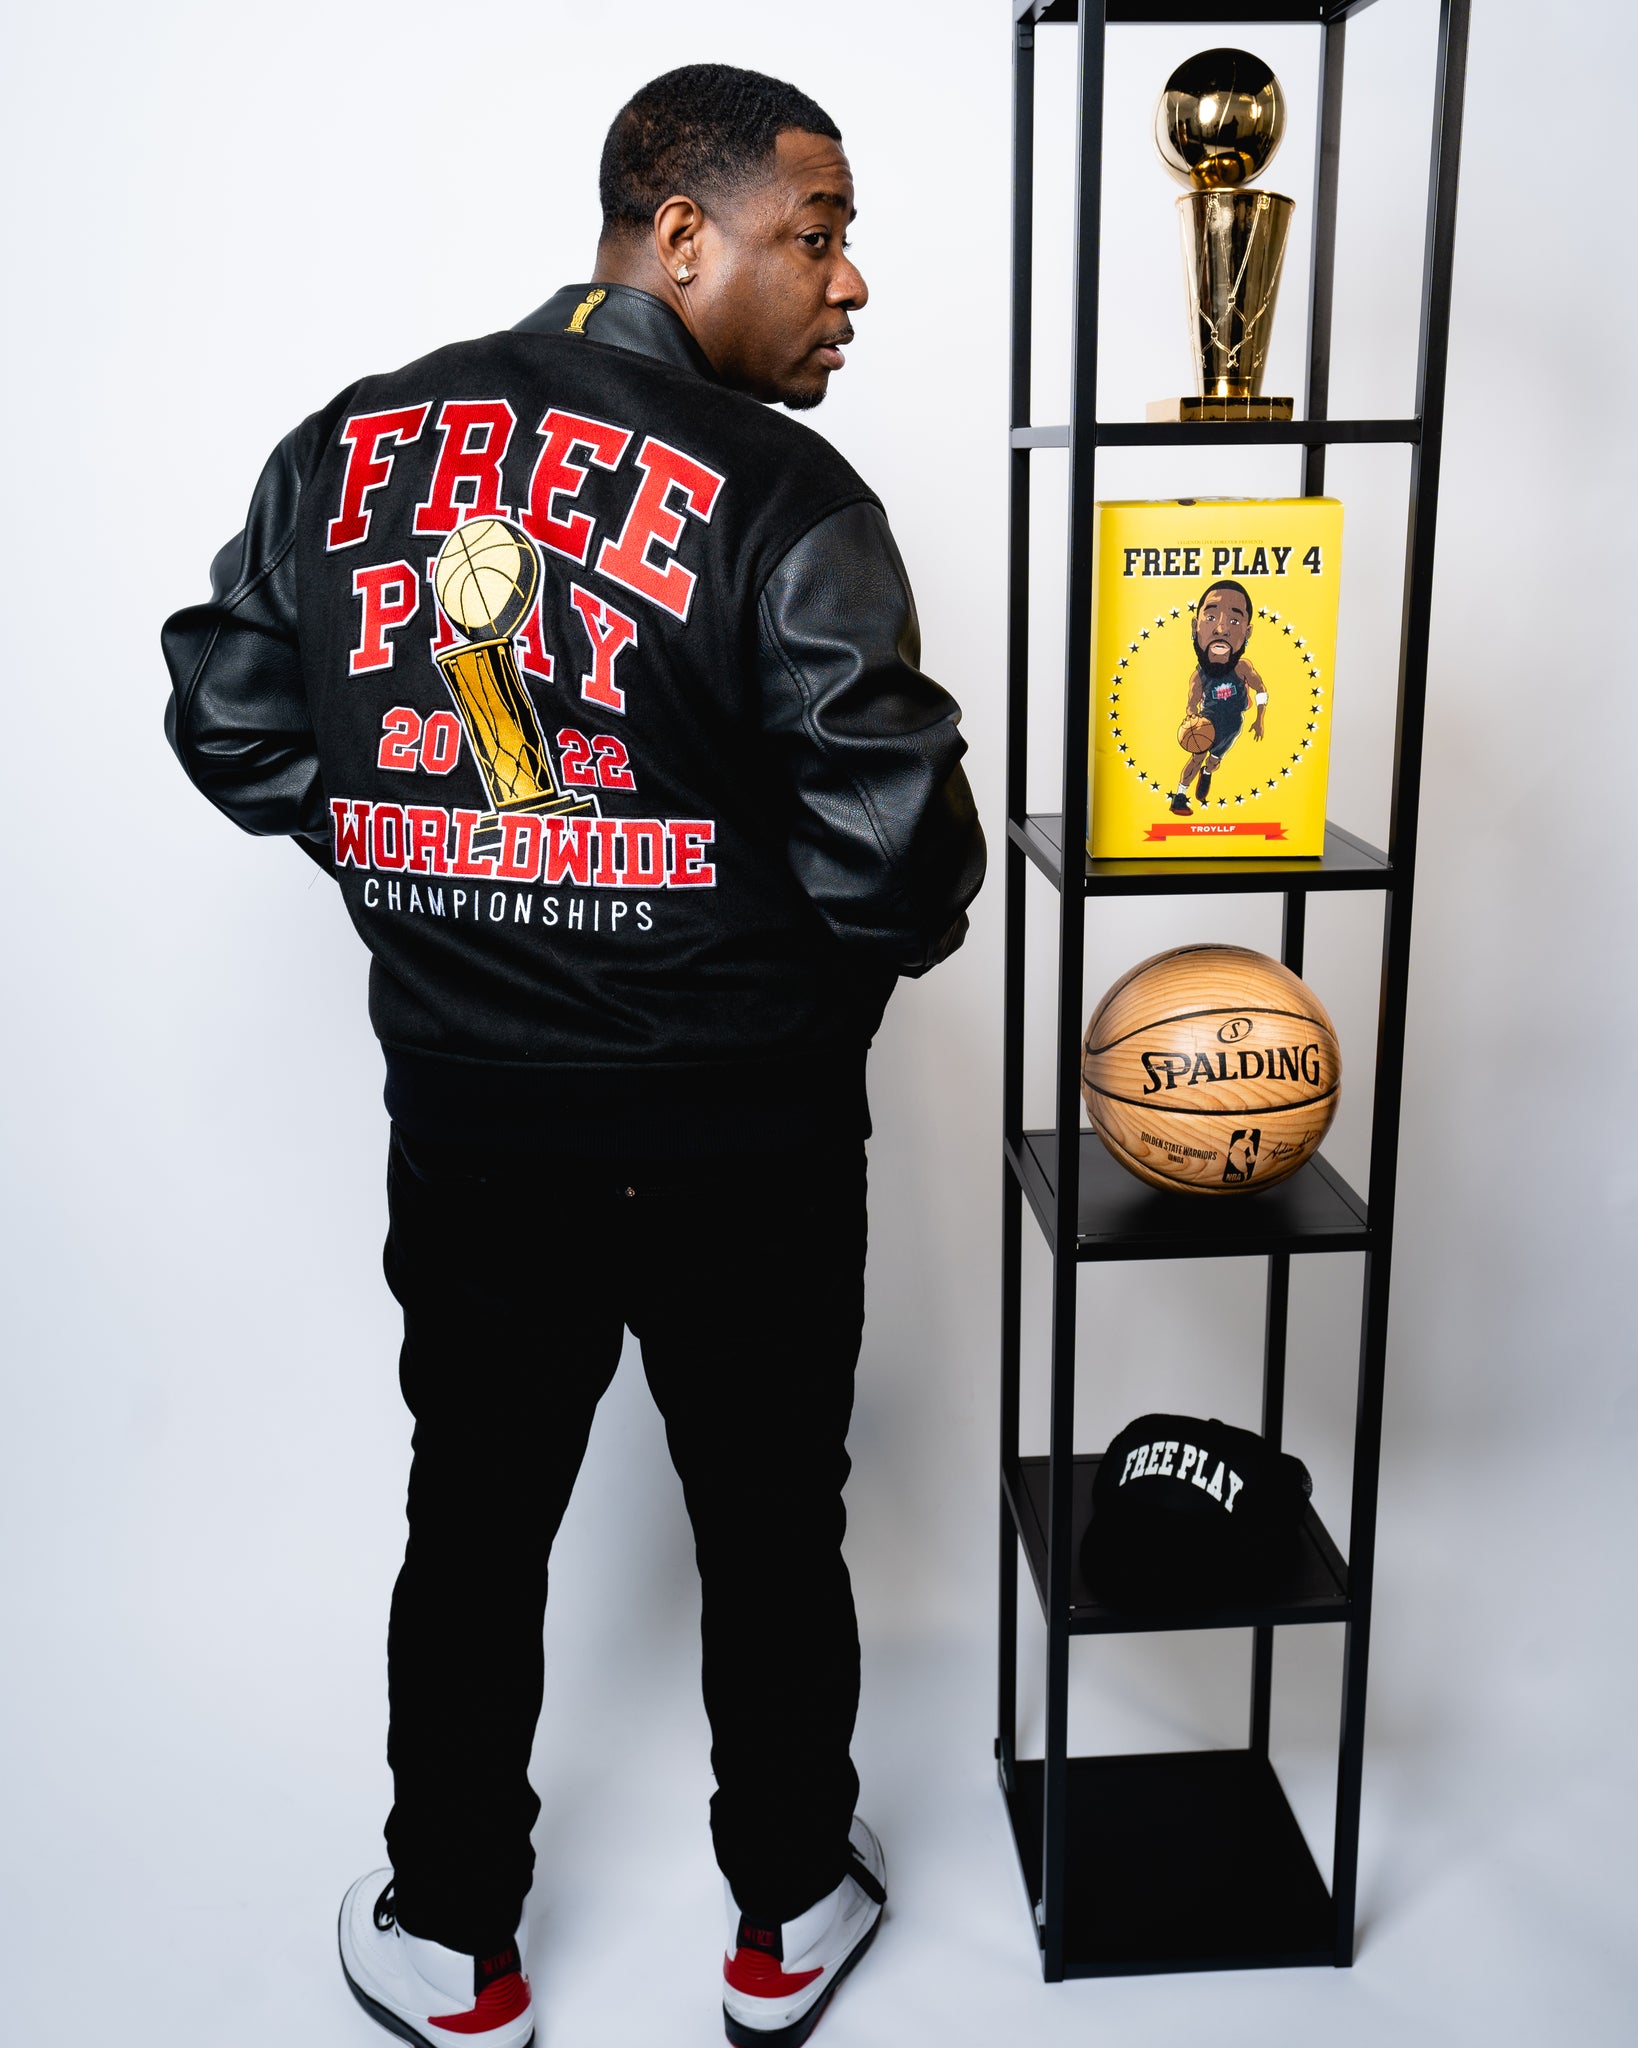 Free Play Music Group Limited Edition "Varsity Jacket" *Pre-Order*